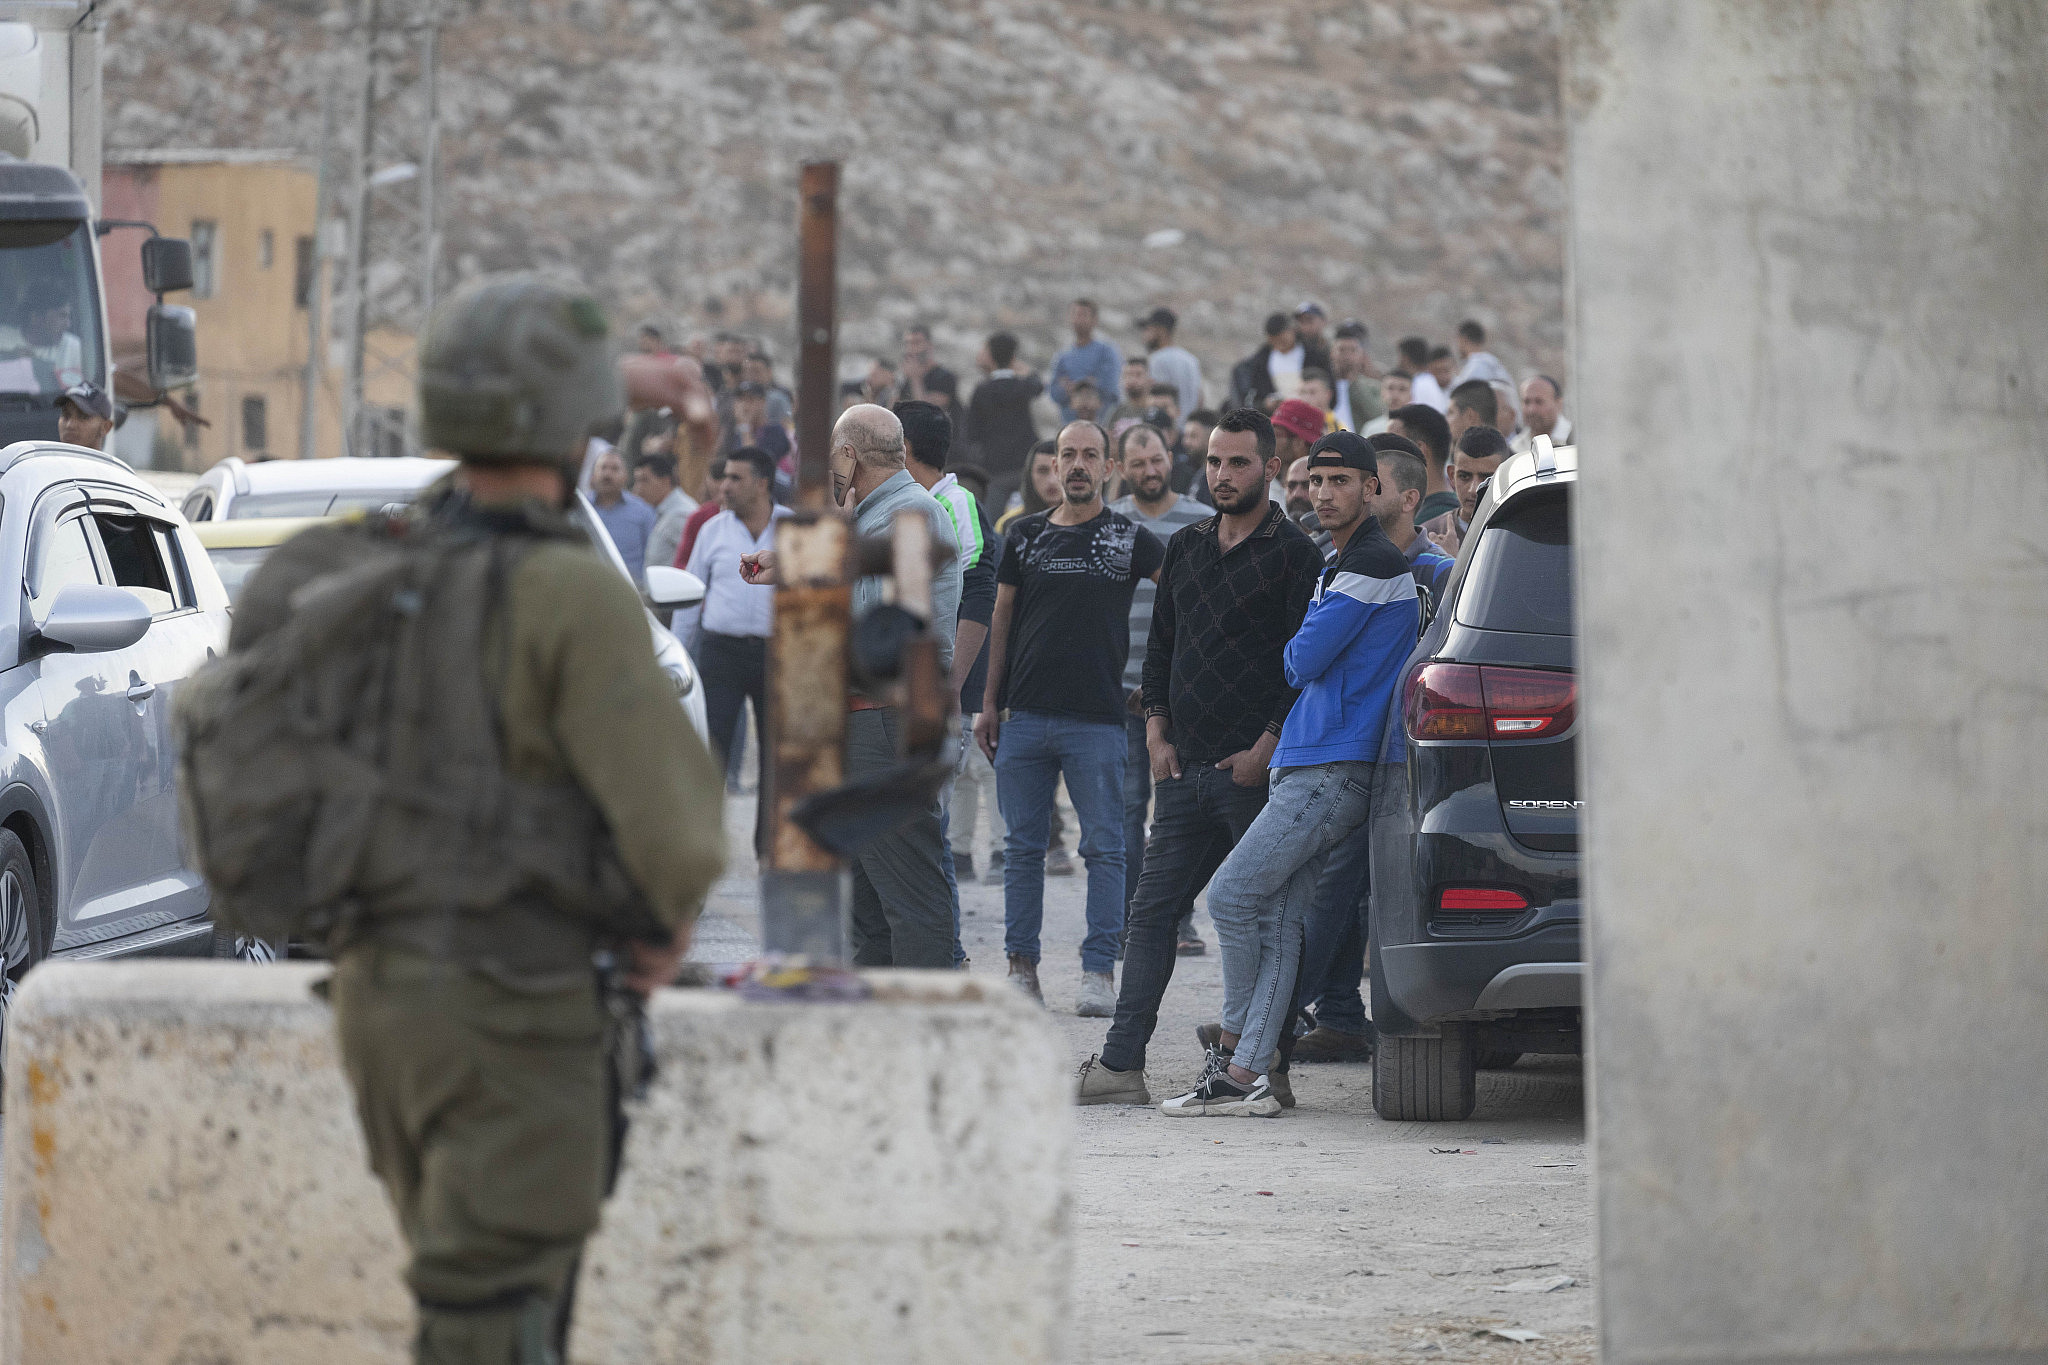 Palestinians line up at the Israeli military checkpoint of Beit Furik, east of Nablus, where strict inspection measures have been imposed recently, October 19, 2022. (Oren Ziv)